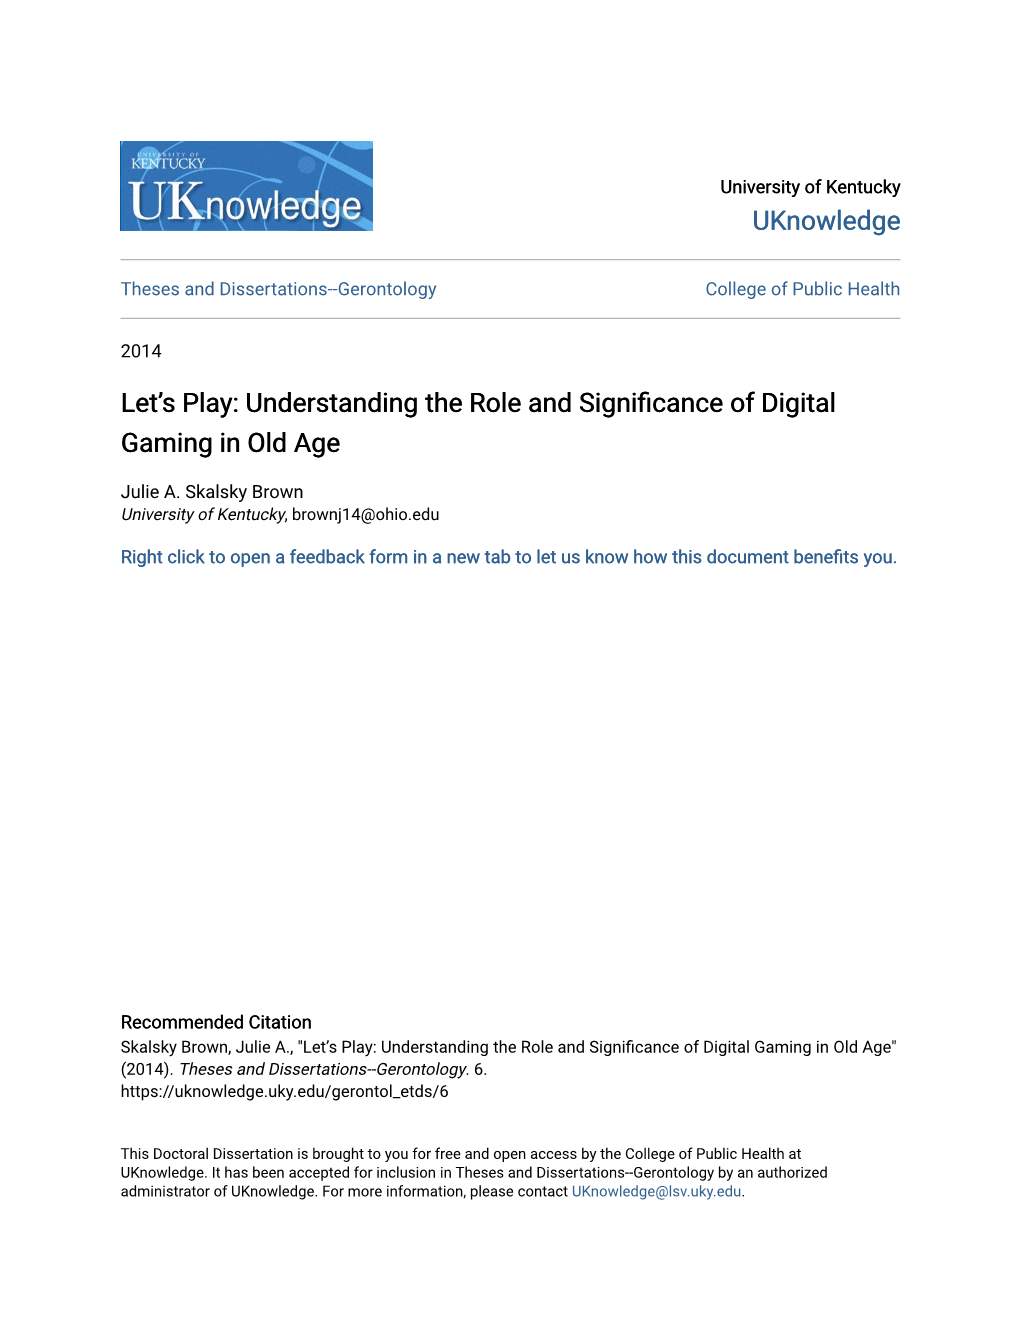 Let's Play: Understanding the Role and Meaning of Digital Games in the Lives of Older Adults